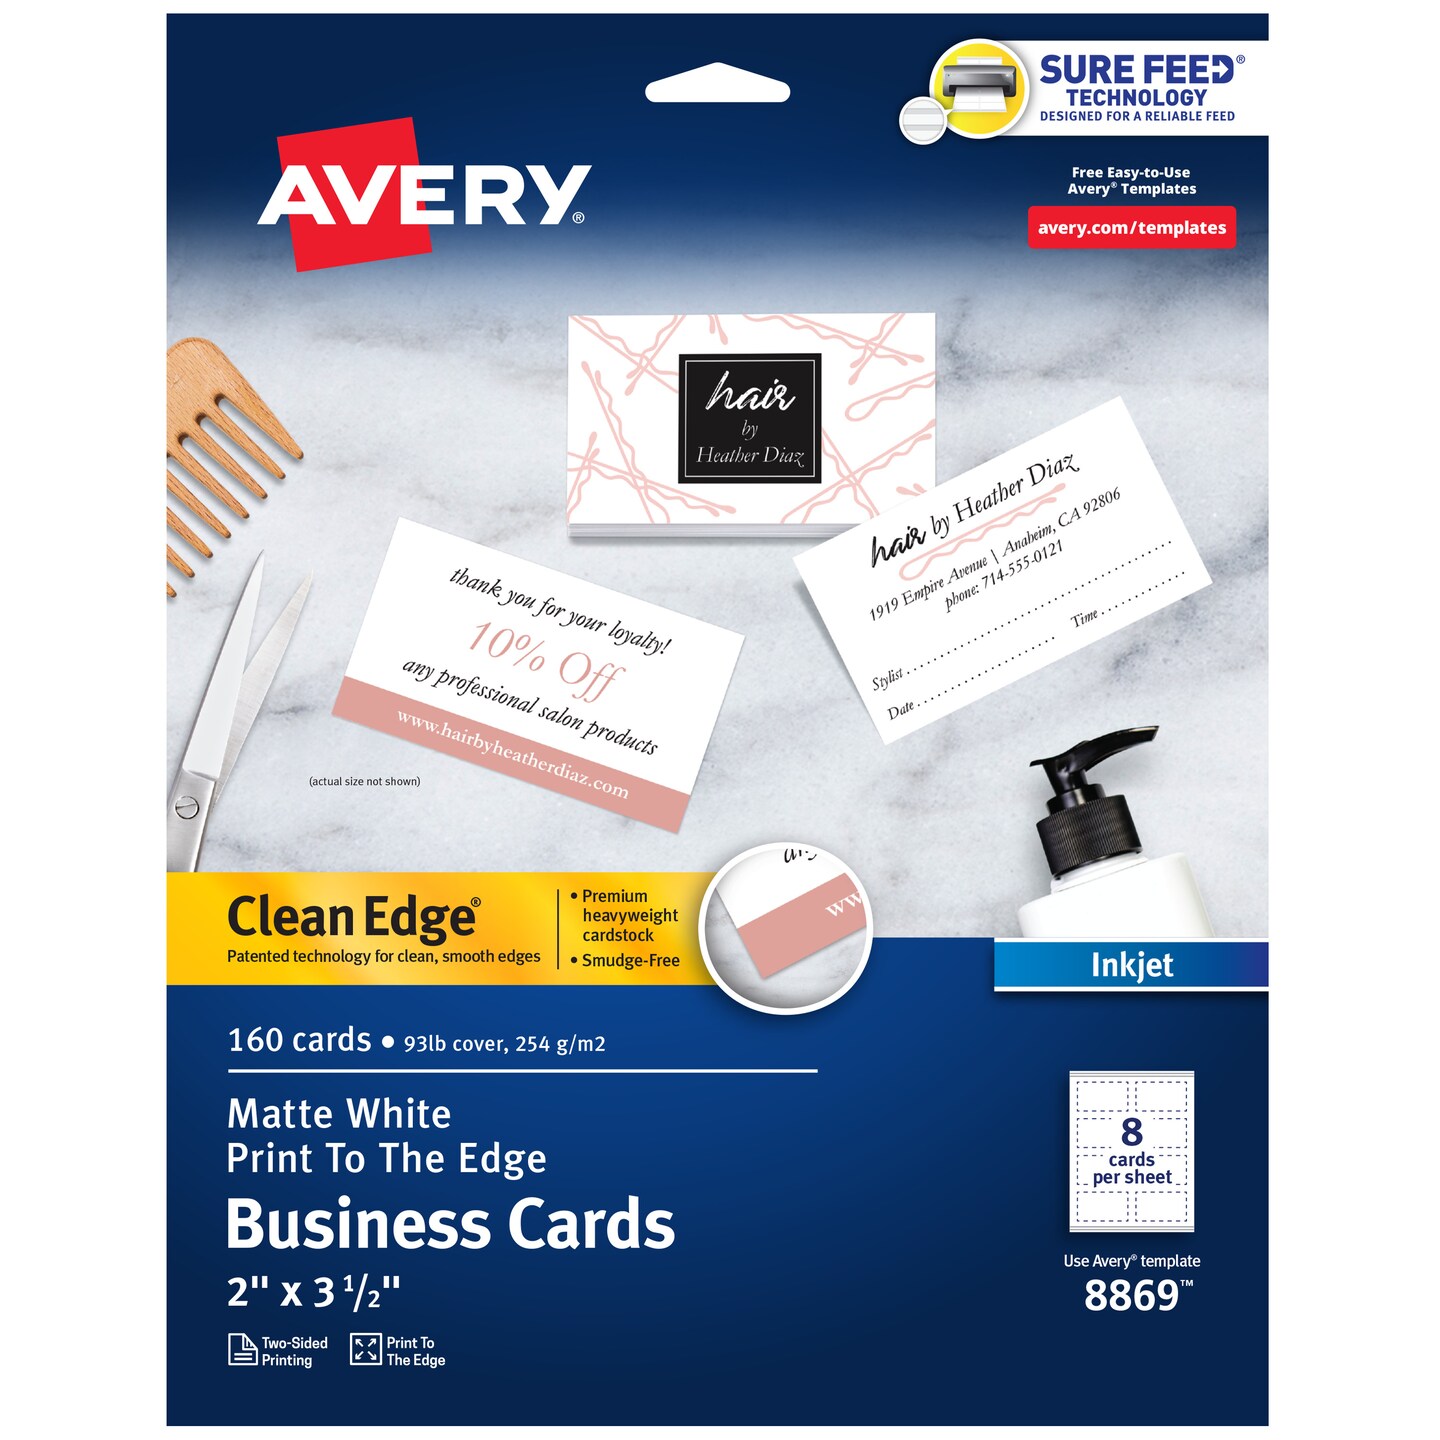 avery-clean-edge-printable-business-cards-with-sure-feed-technology-2